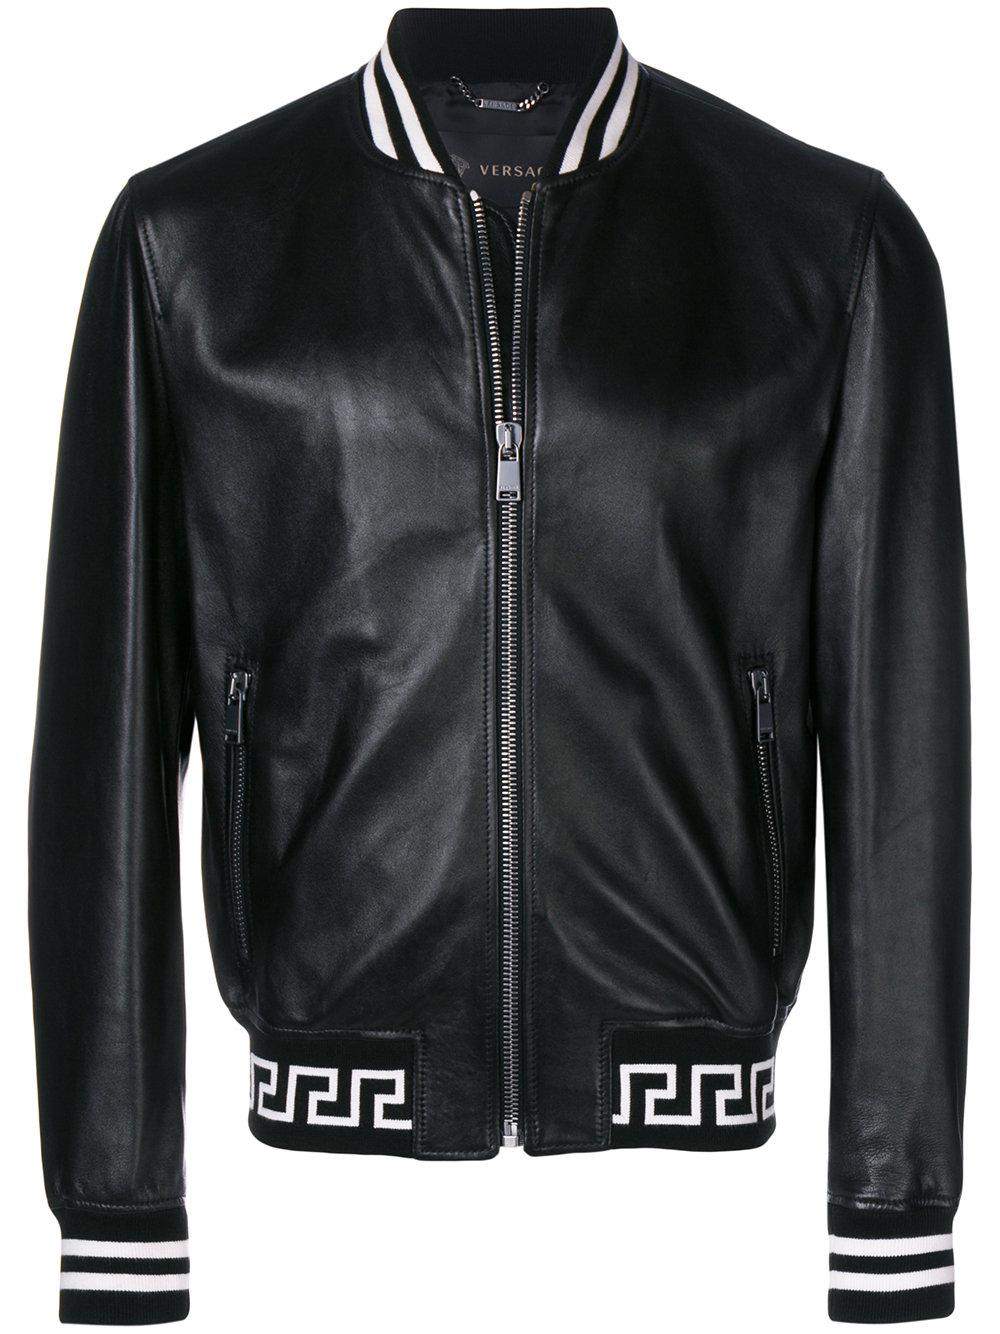 Versace Leather Jacket With Worked Details in Black for Men - Lyst